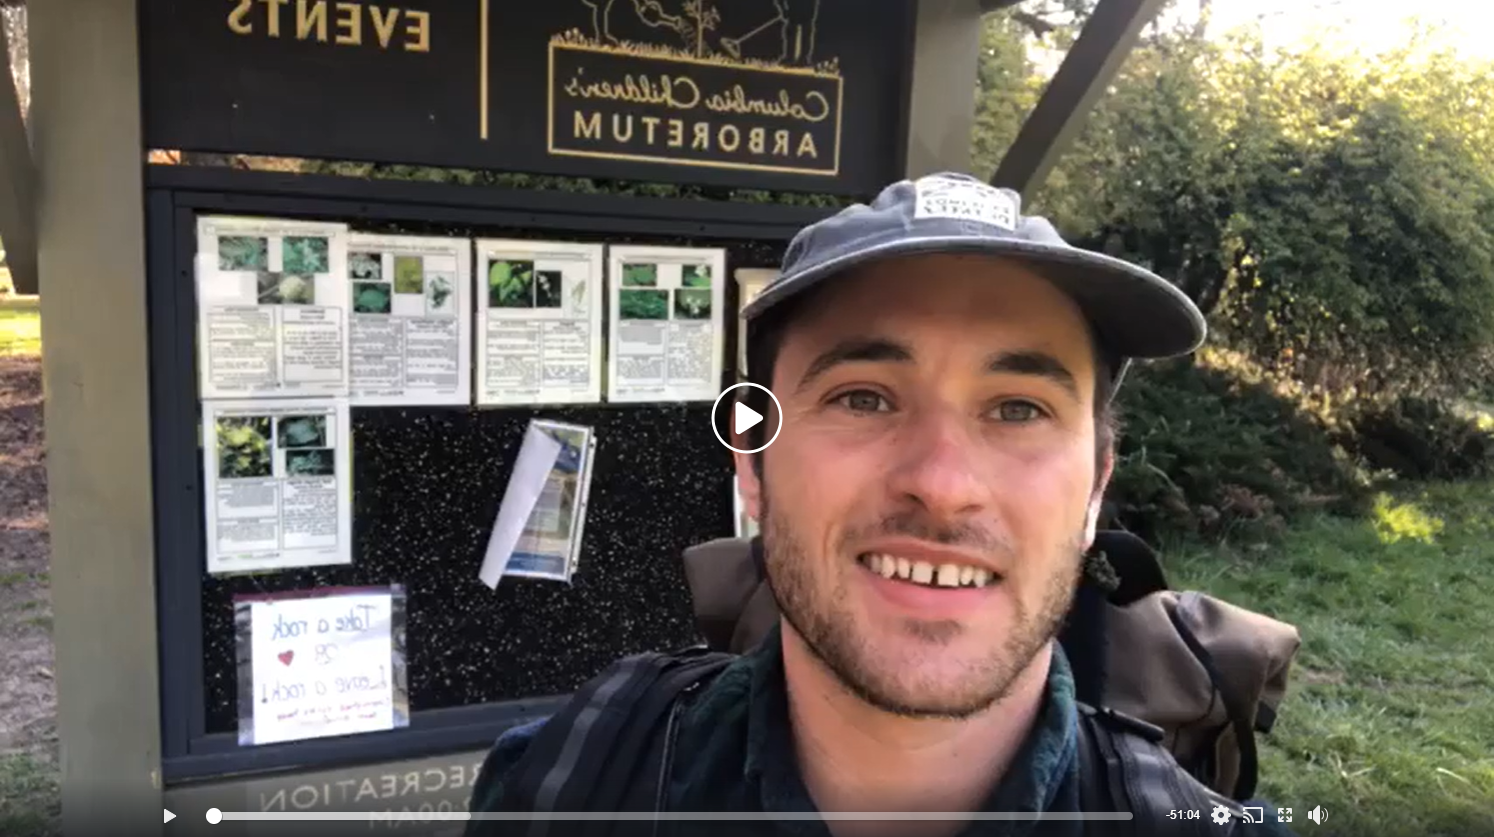 A Friends of Trees staff member gives a park tour live on its Facebook page